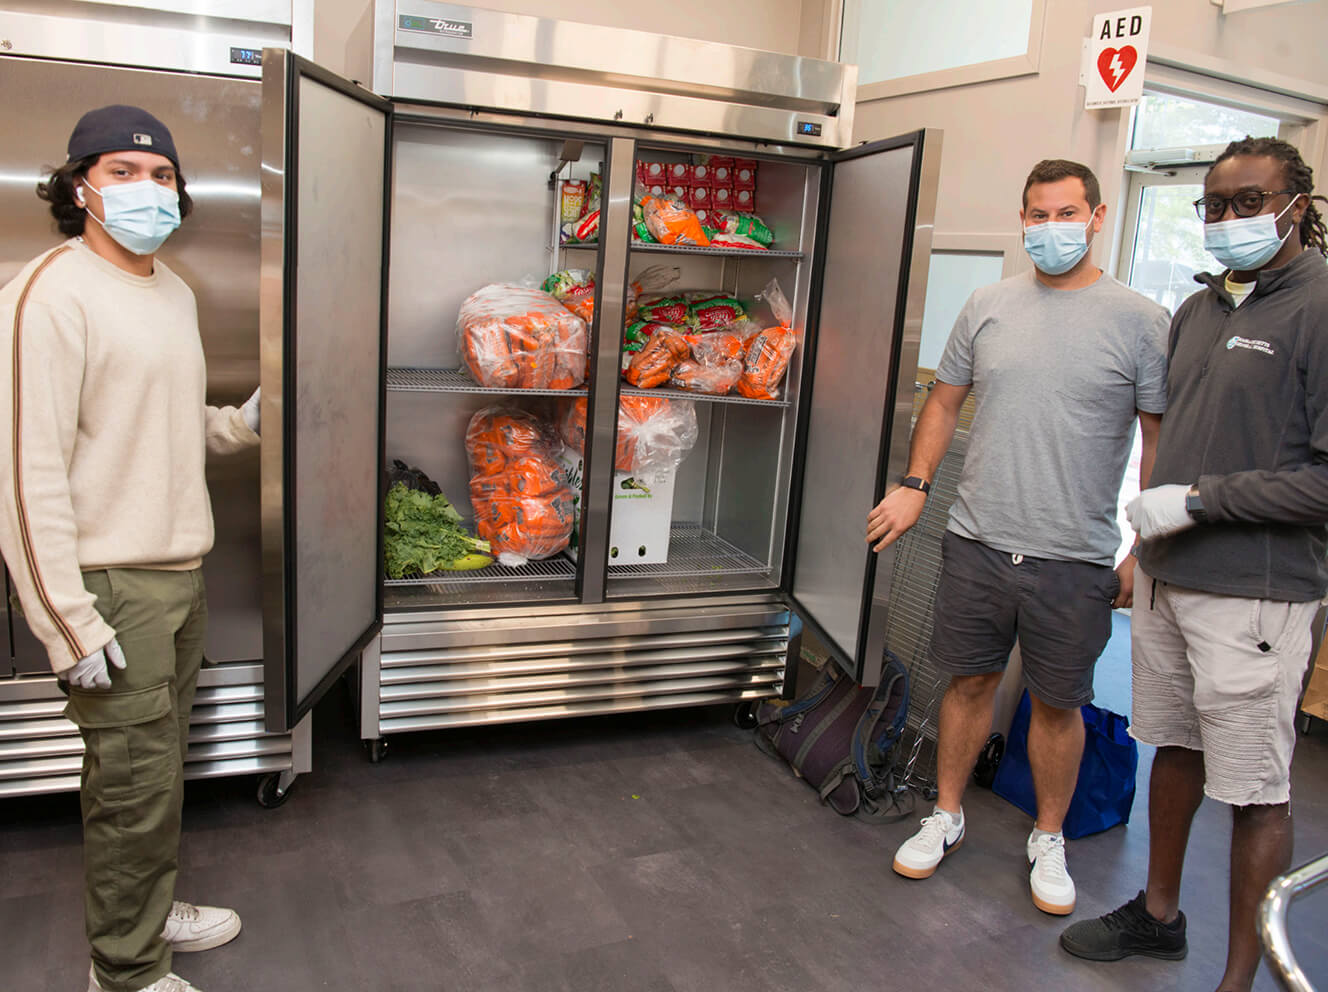 MGH Revere Food Pantry Steps Up